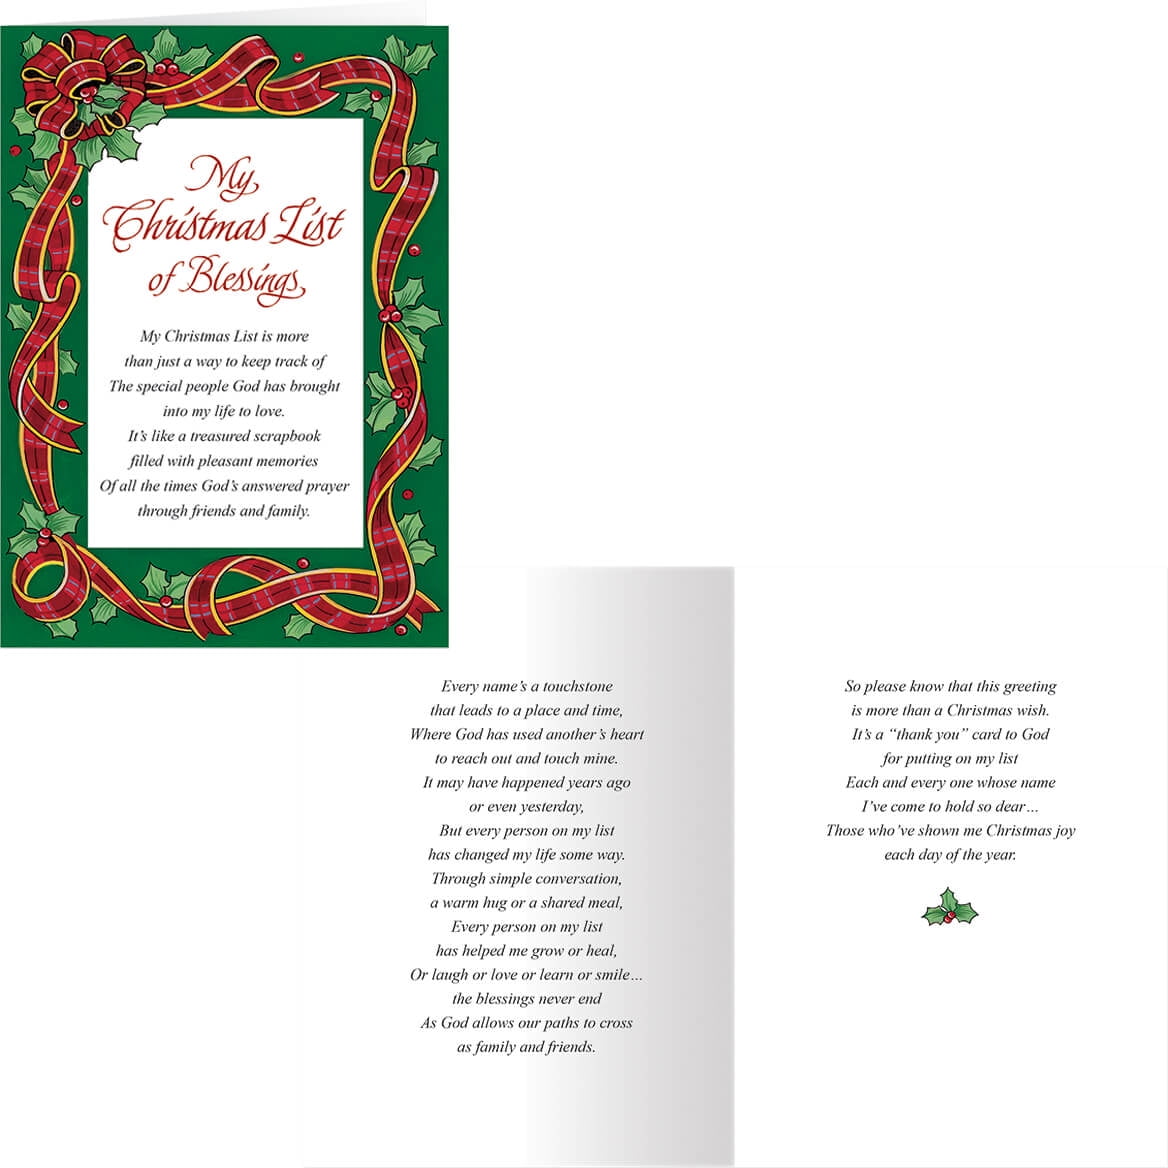 Christmas Gift Tag  Teacher Gift Card Poem by Polka Dots Please